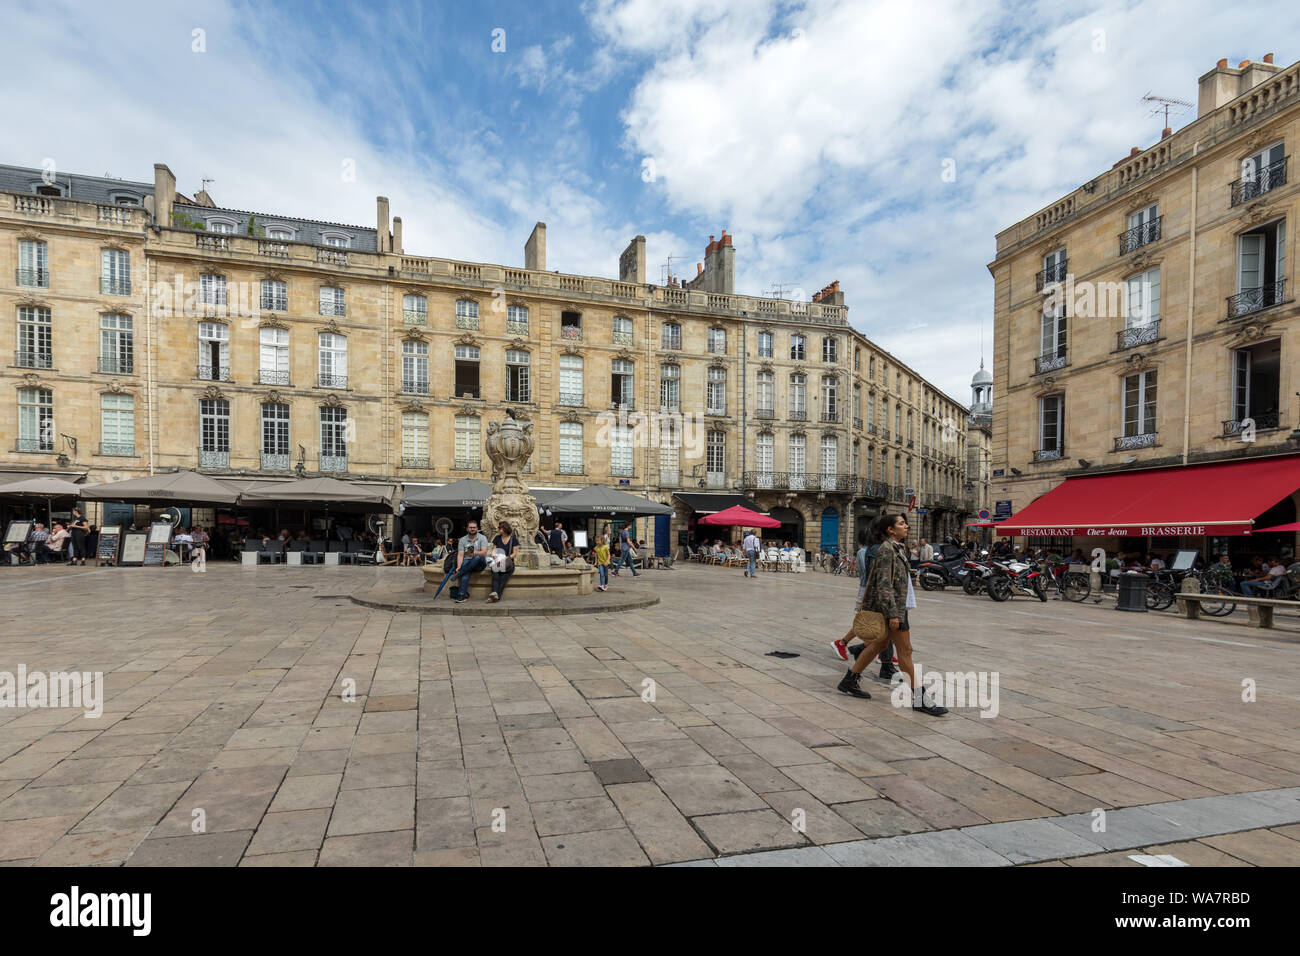 Bordeaux, France - September 9, 2018: Parliament Square or Place du Parlement . Historic square featuring an ornate fountain, cafes and restaurants in Stock Photo